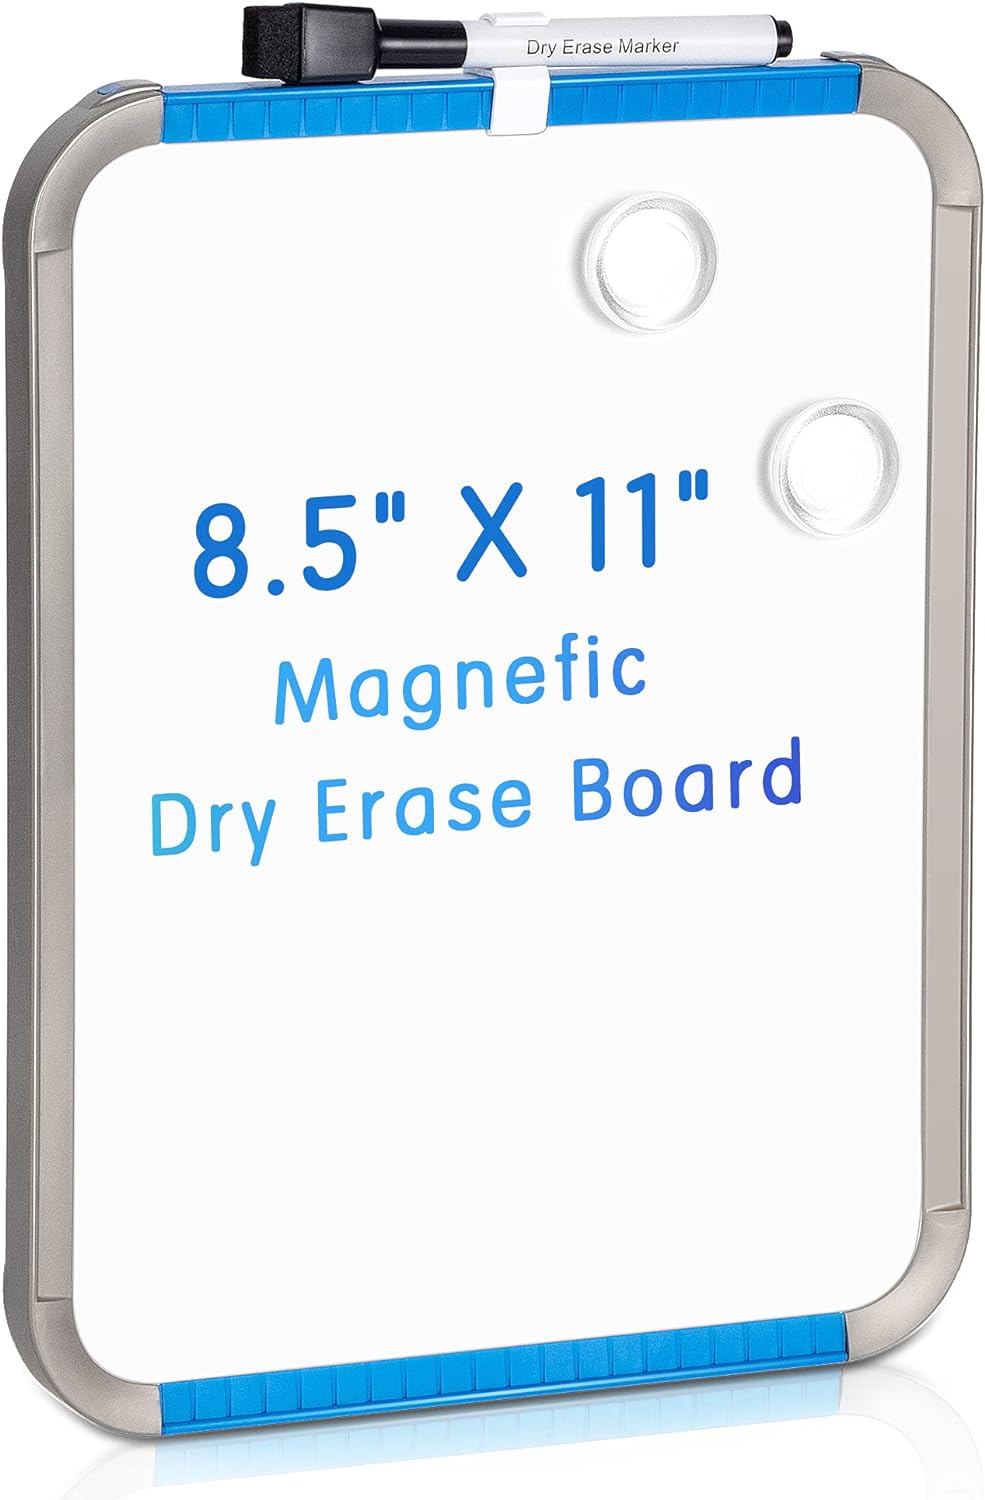 Deli Magnetic Dry Erase Board, 8.5 x 11 Inches, Small White Board with Markers & Magnets for Refrigerator, Locker, Kids, Students, Blue Frame